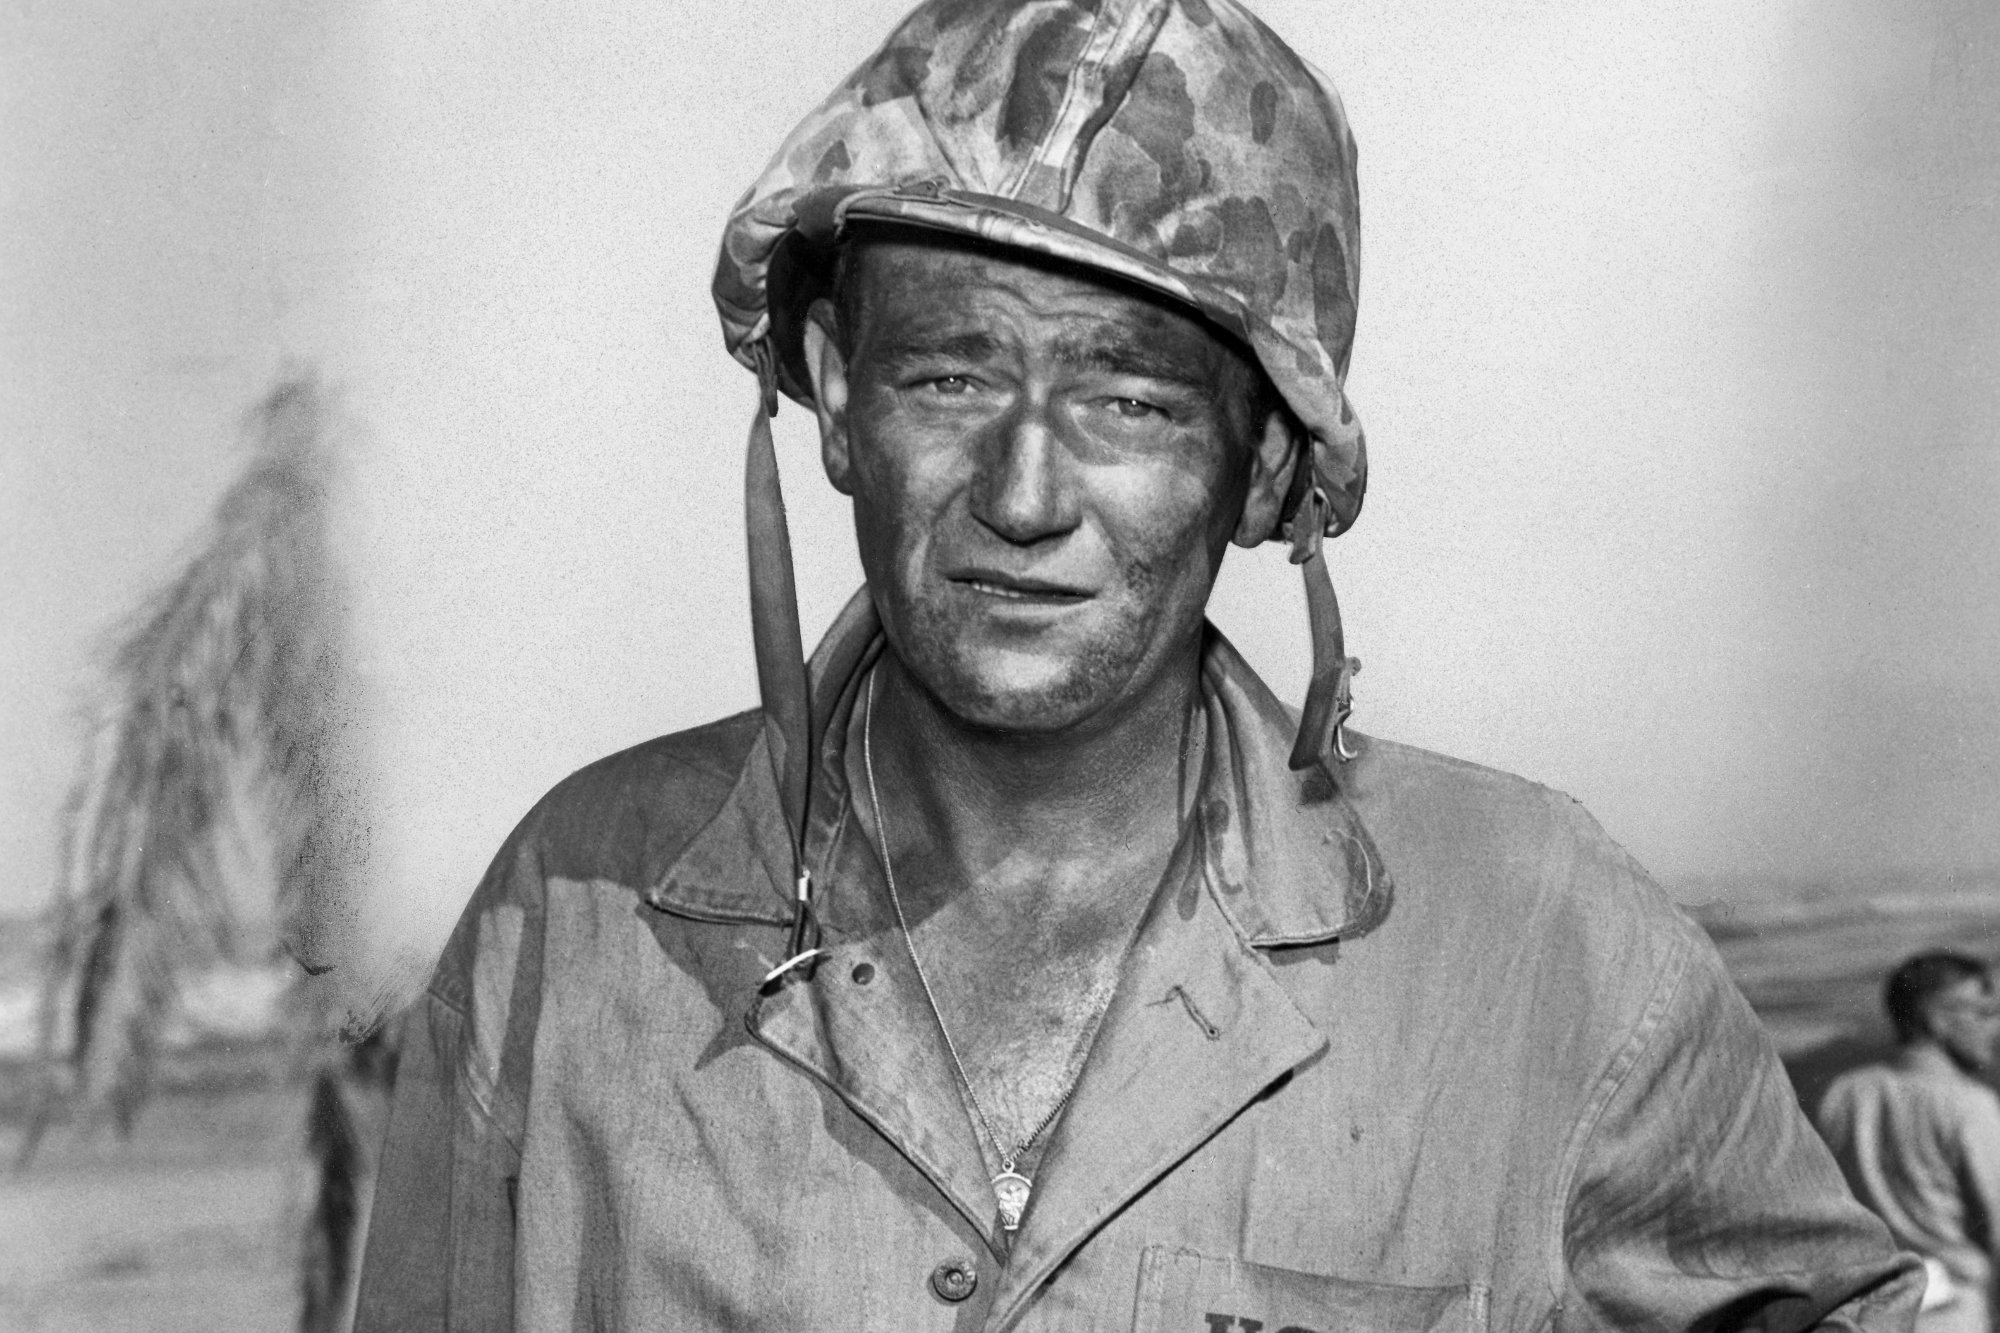 'Sands of Iwo Jima' star John Wayne with a serious look toward the camera in a black-and-white photograph. He's wearing a military uniform and helmet.